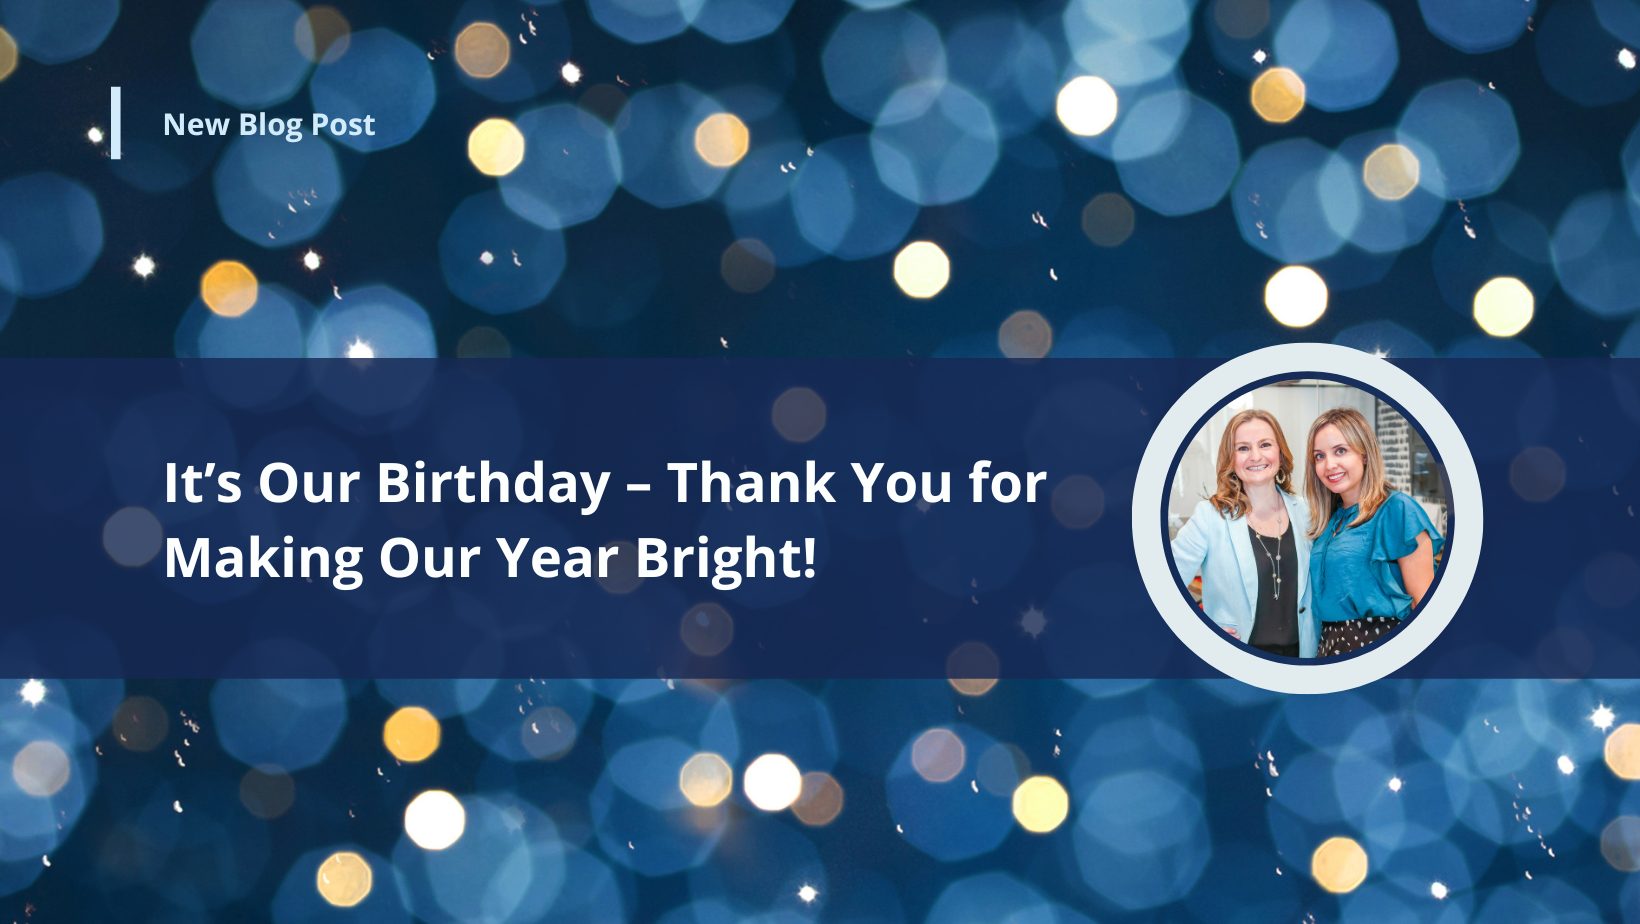 Featured image for “It’s Our Birthday – Thank You for Making Our Year Bright!”